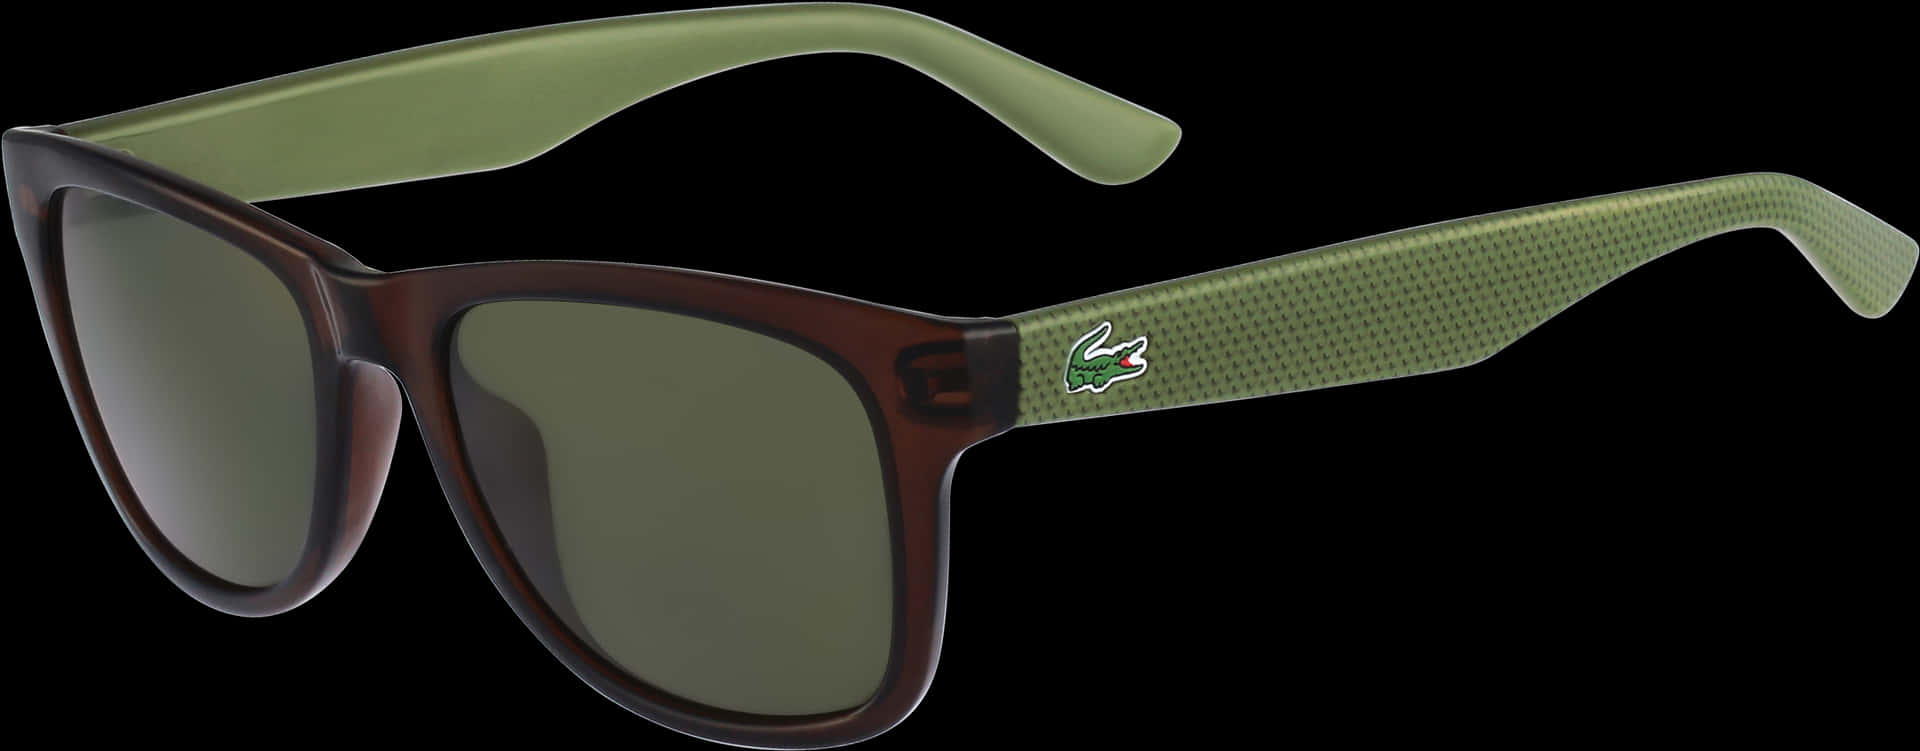 Designer Sunglasseswith Green Accents PNG image